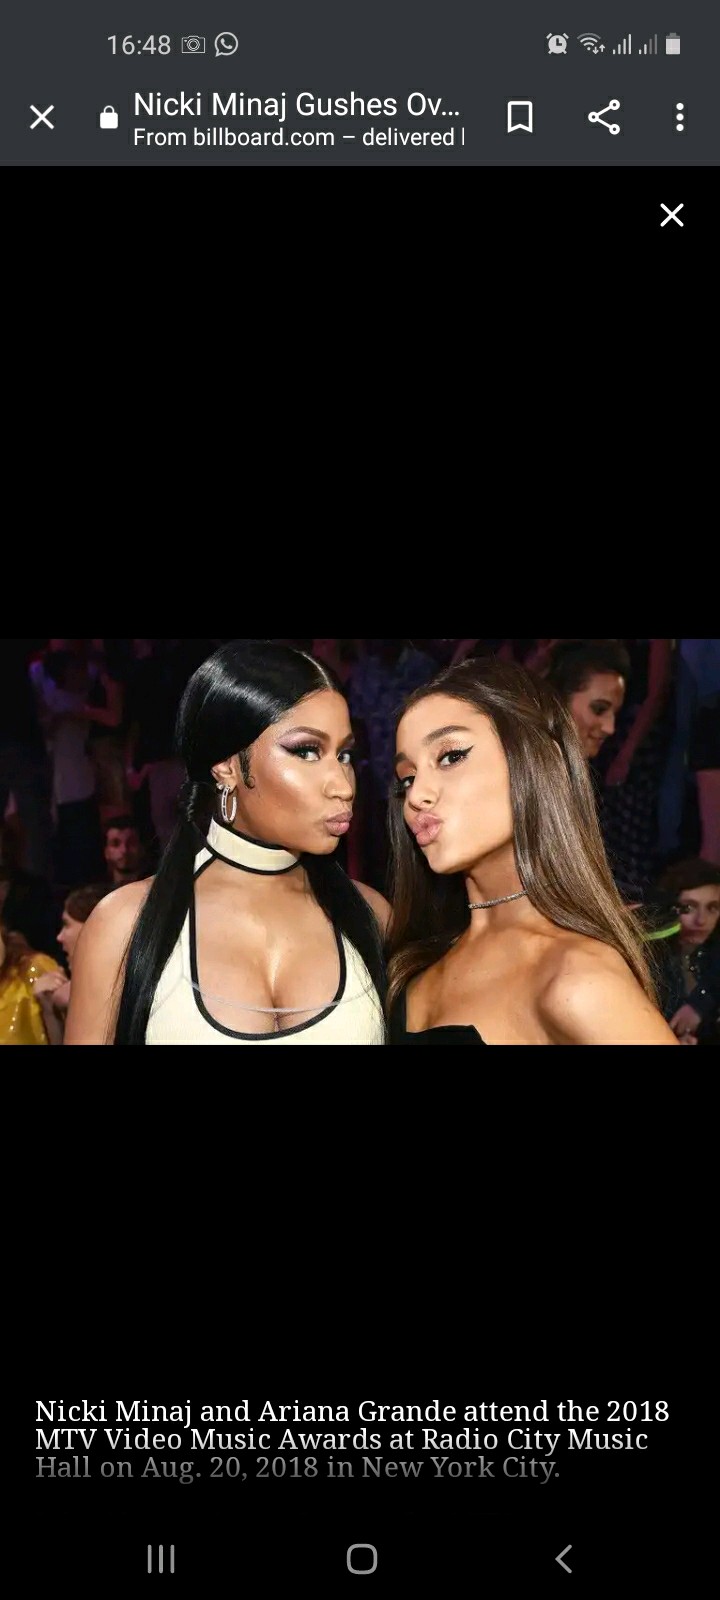 Nicki Minaj Gushes Over the 'Gorgeous Gifts' Ariana Grande Sent Her Baby Boy After His Birth